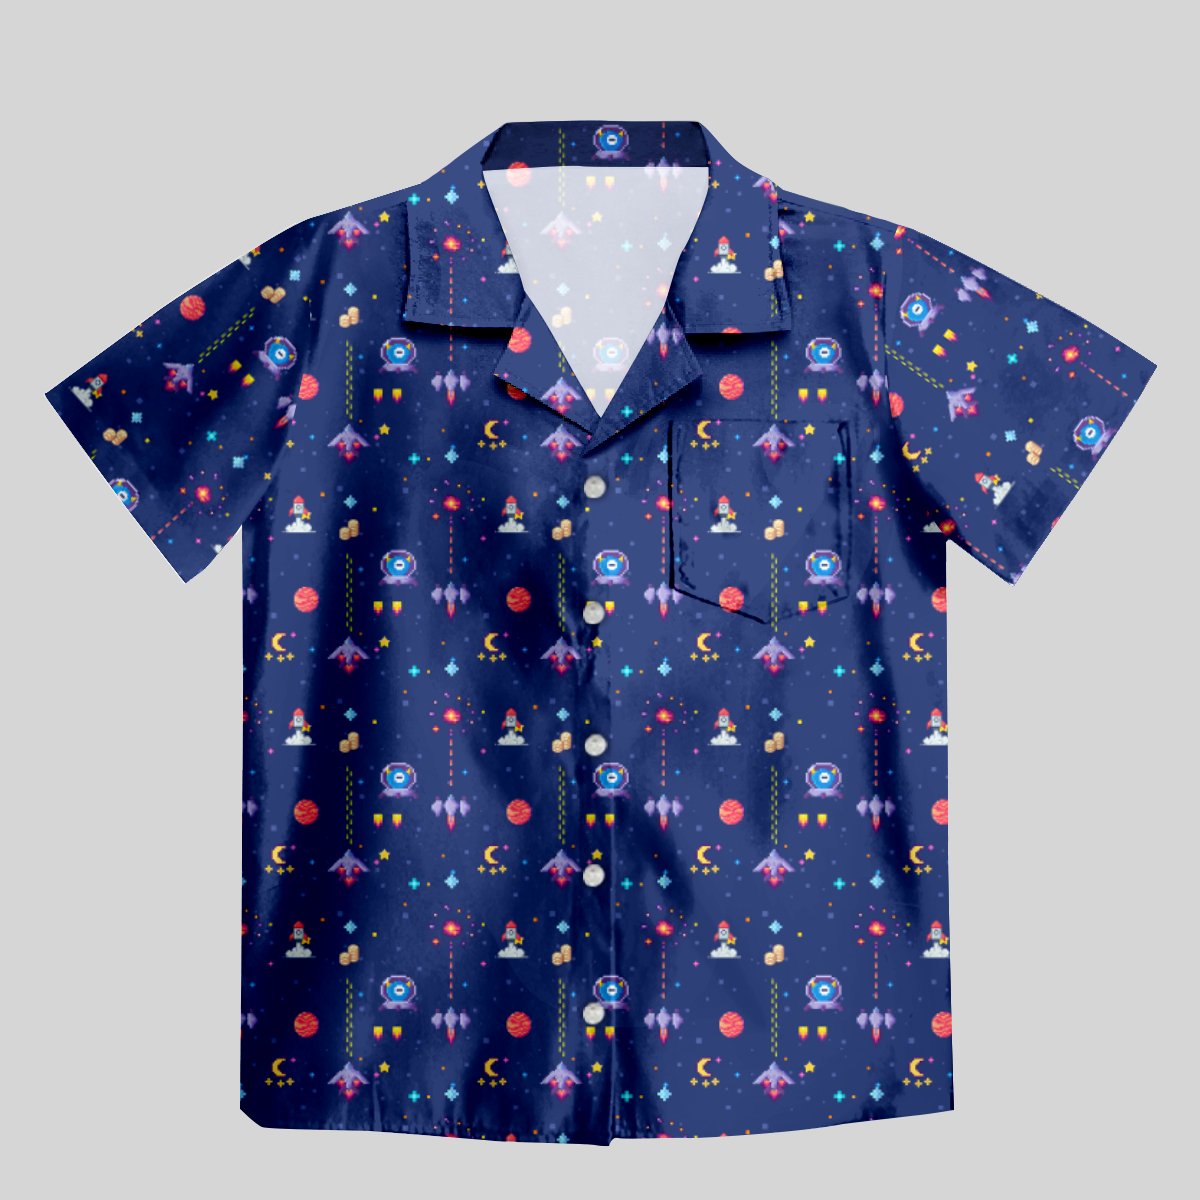 Retro Style Arcade Video Game featuring Space Blue Button Up Pocket Shirt - Geeksoutfit